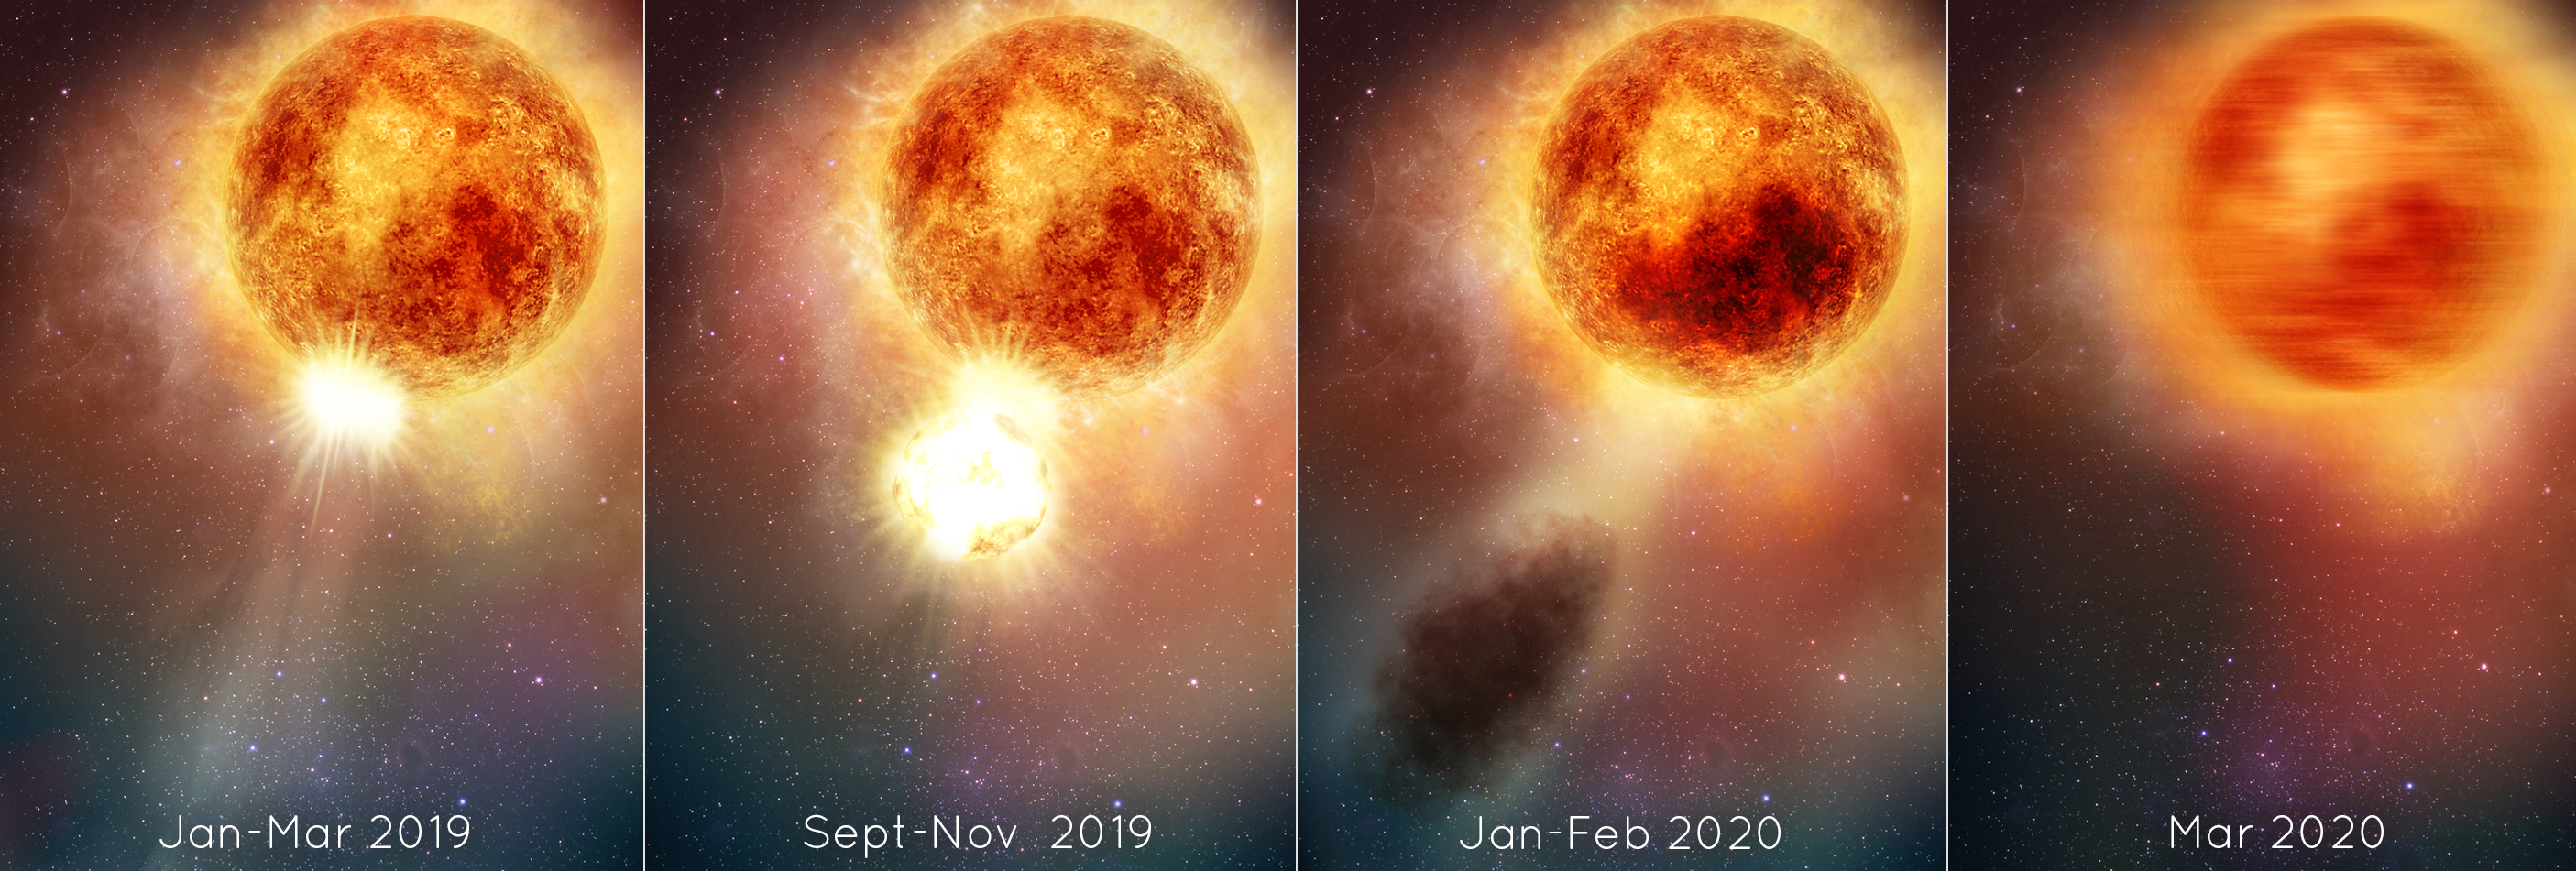 Hubble Sees Red Supergiant Recovering After Explosion